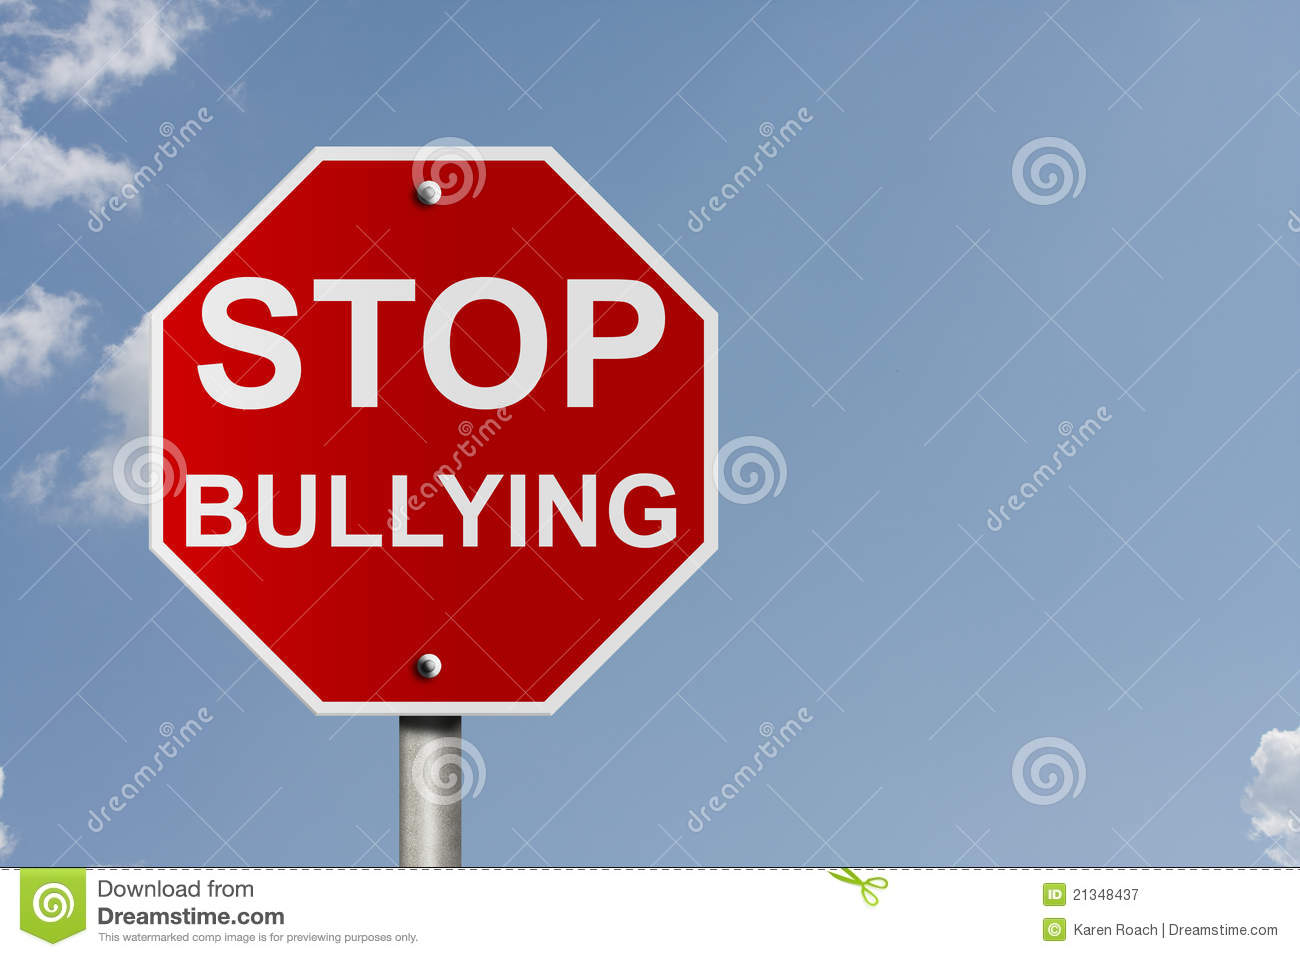 Stop Bullying Royalty Free Stock Photography   Image  21348437